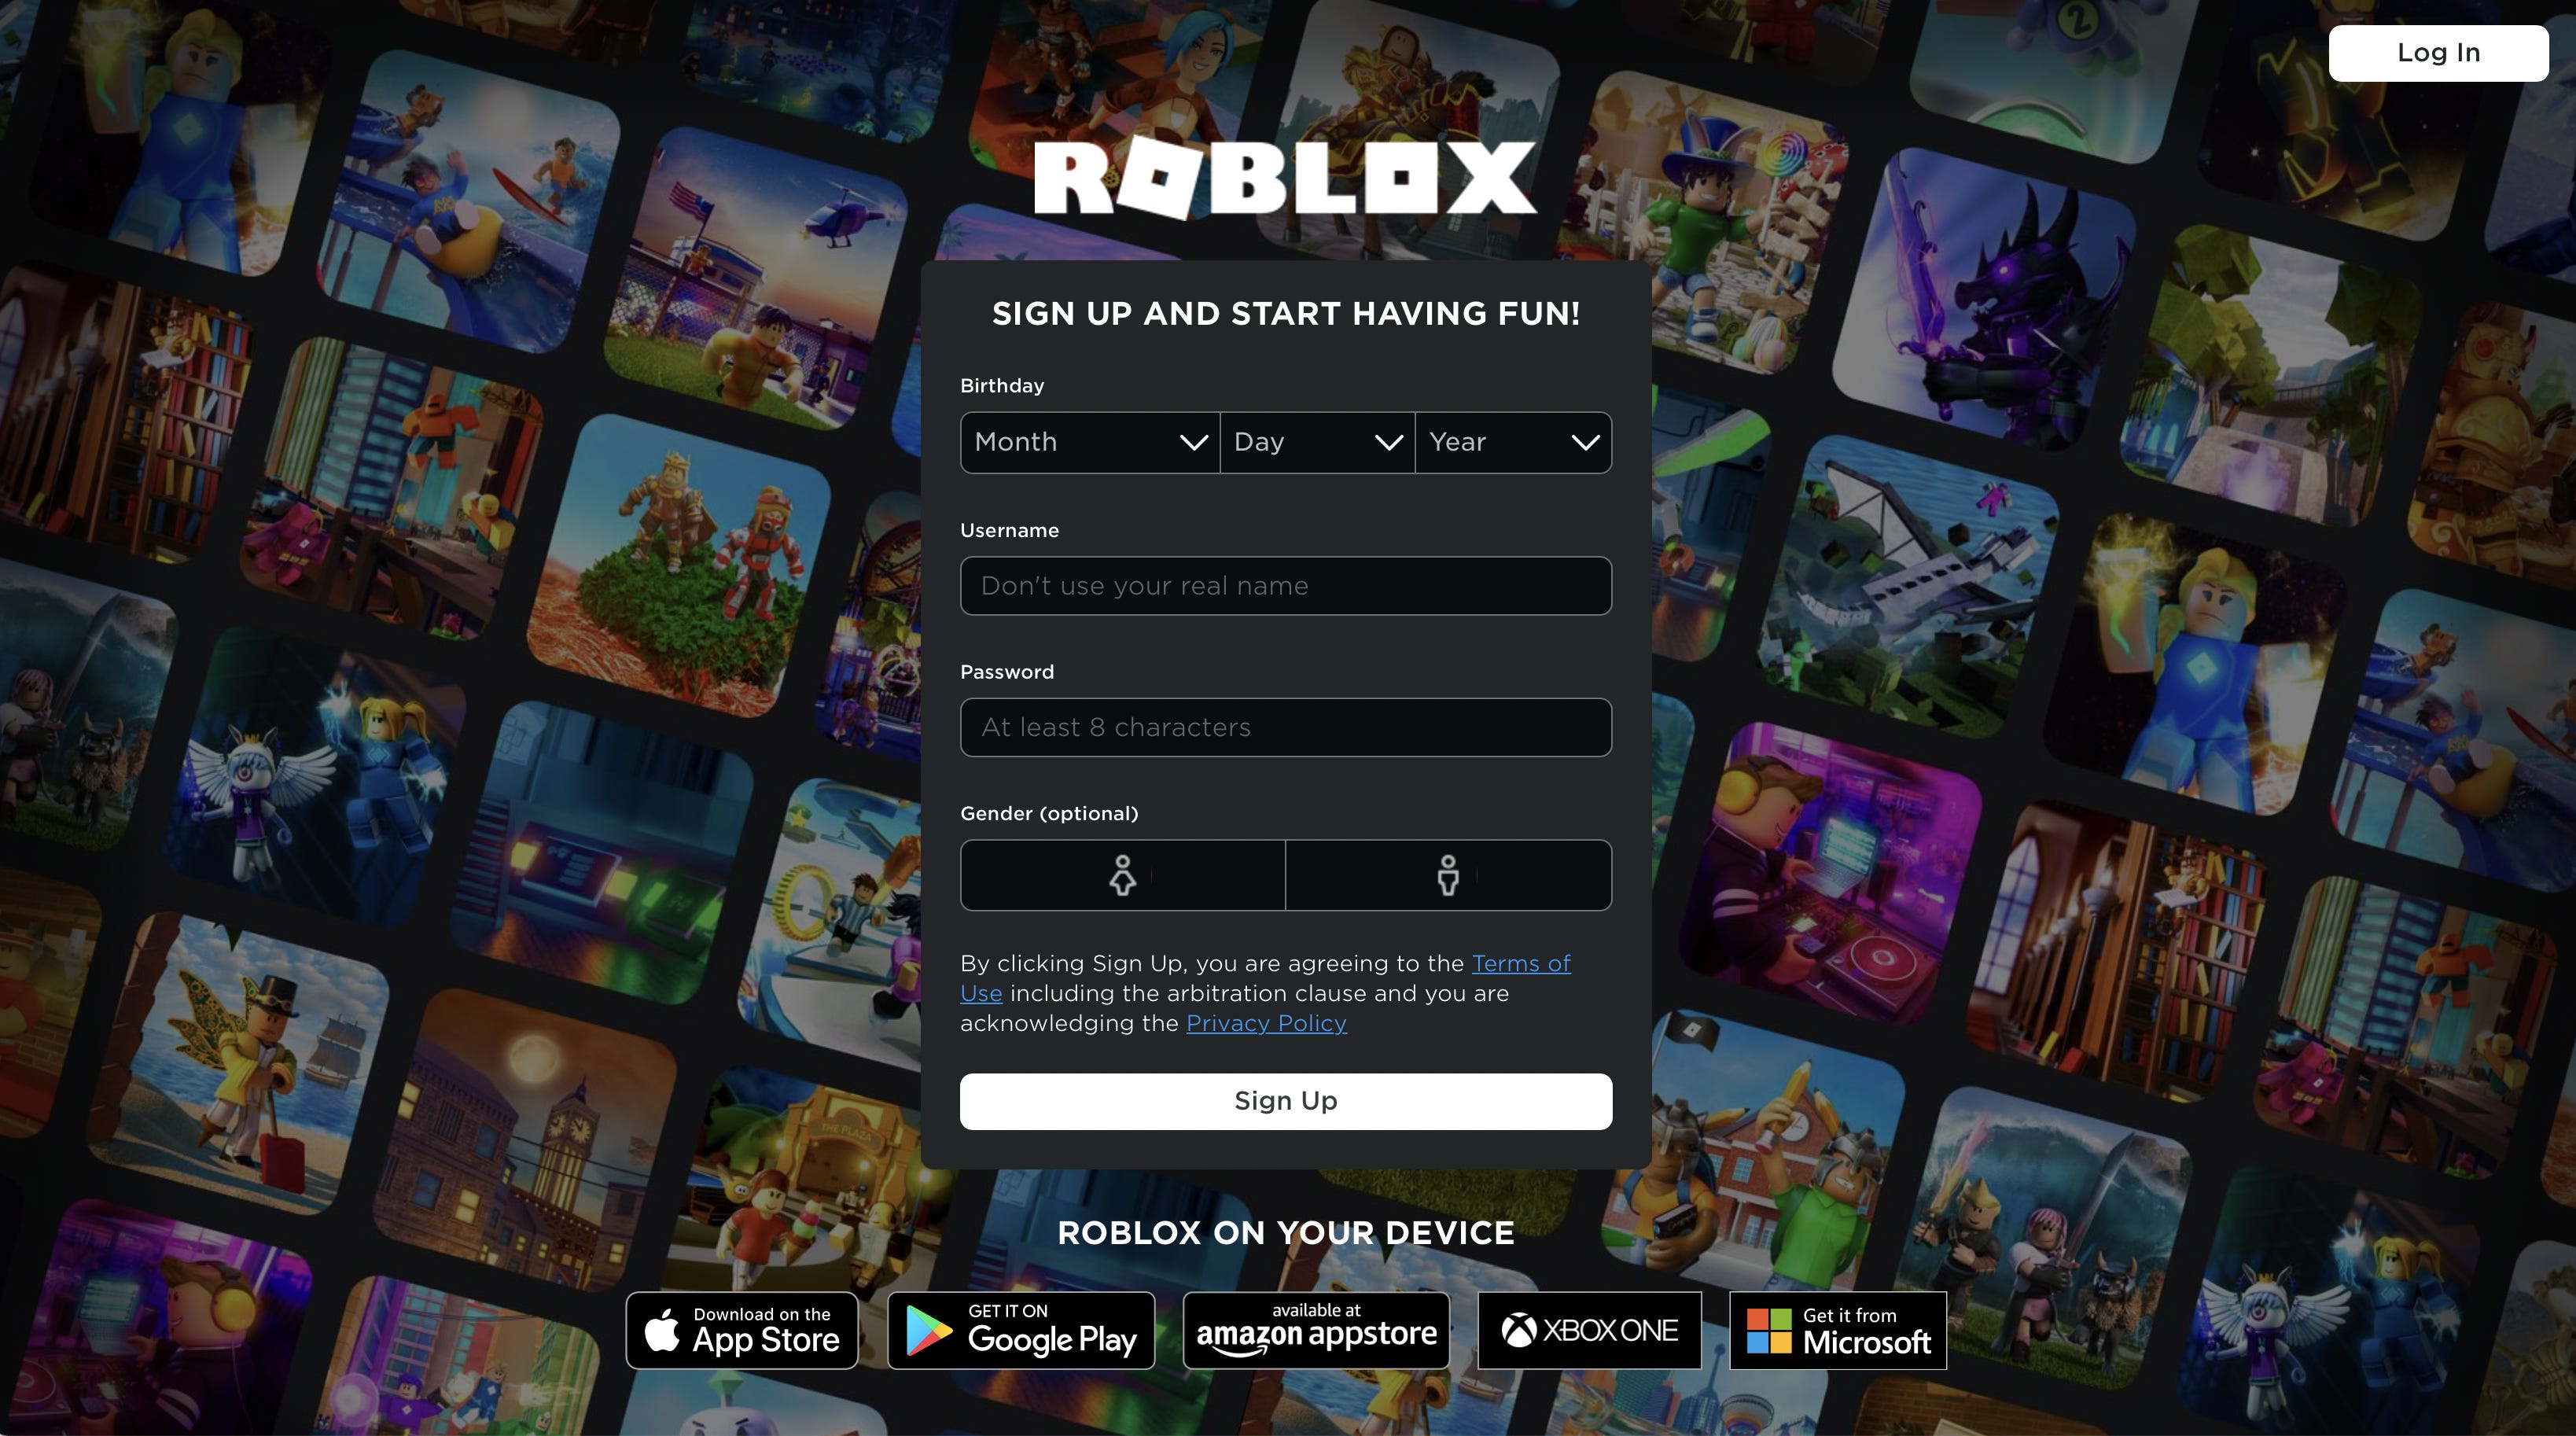 Roblox S Growth Strategies And Why Becoming A Metaverse Is A Bad Idea By Benjamin Schroeder No Ordinary Strategy - roblox command to move a user to a diffrent game